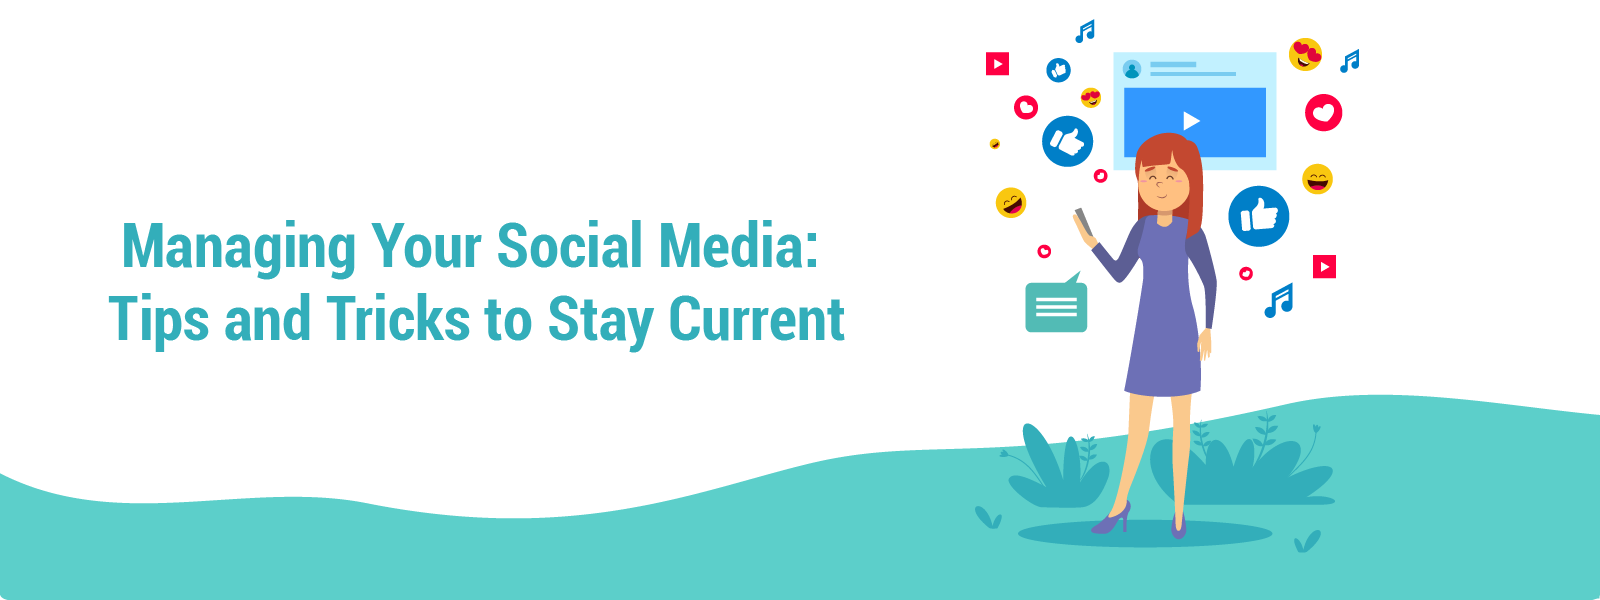 Managing Your Social Media: Tips and Tricks to Stay Current